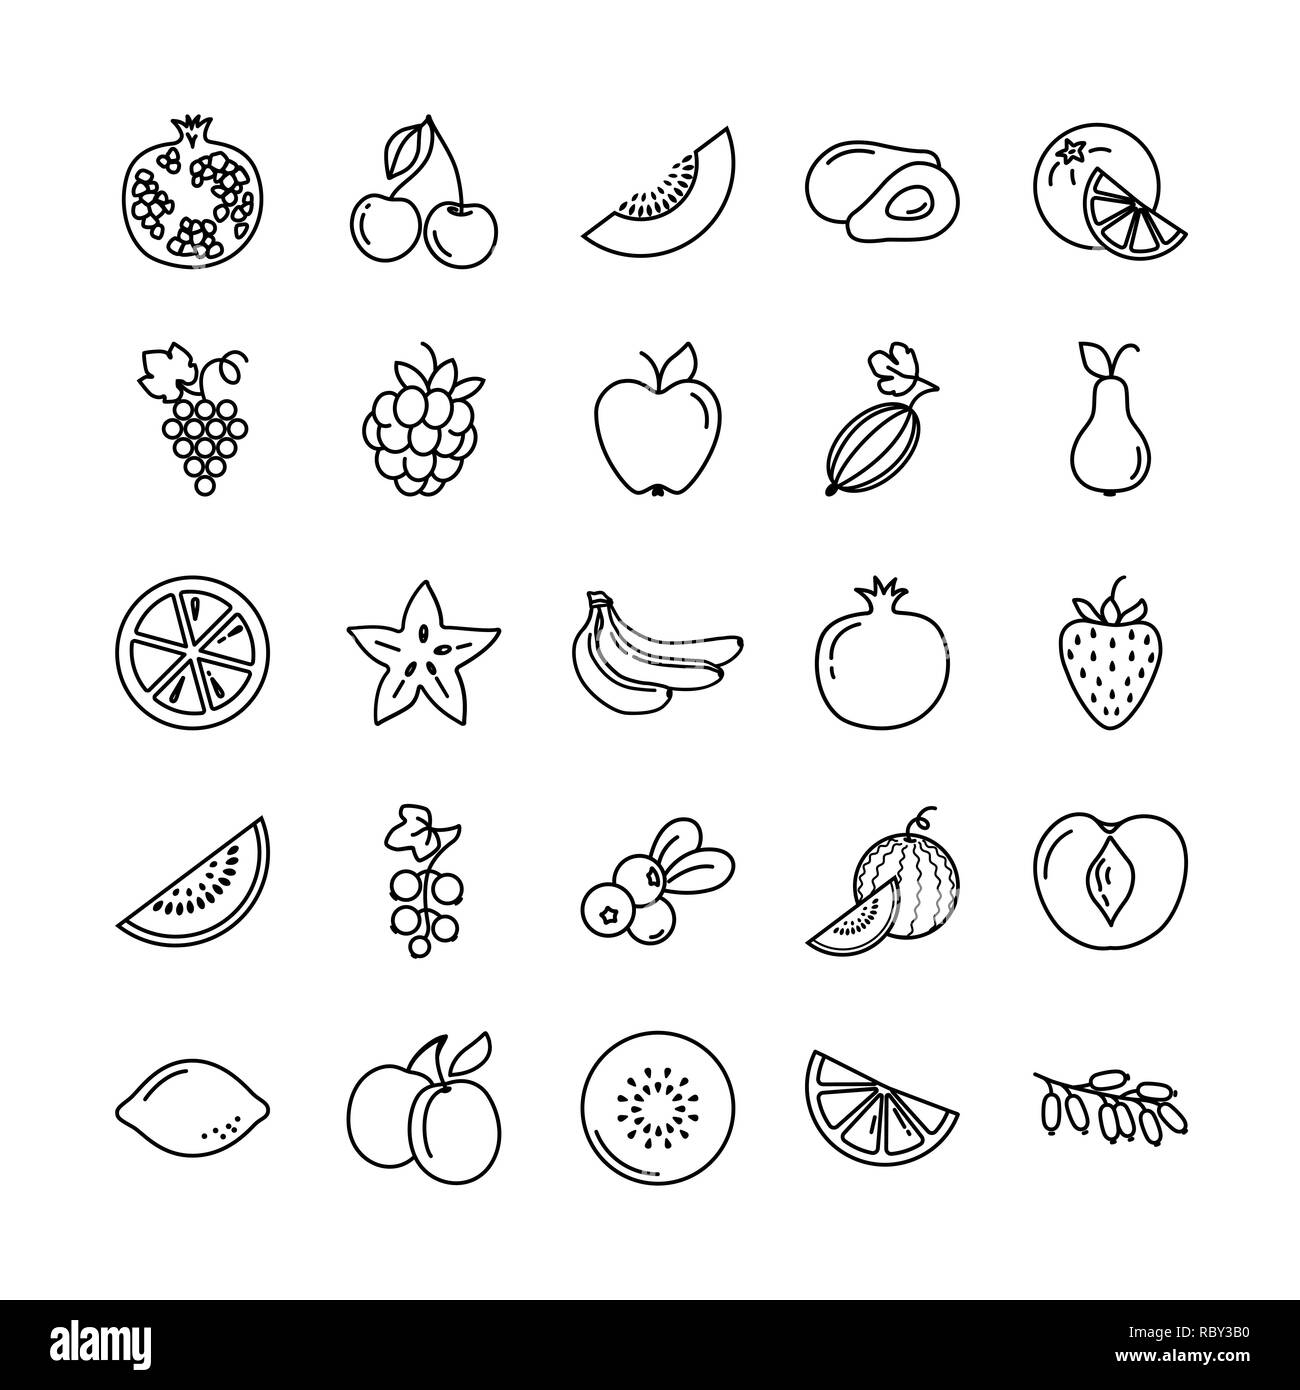 Set of icons with different fruits Stock Vector